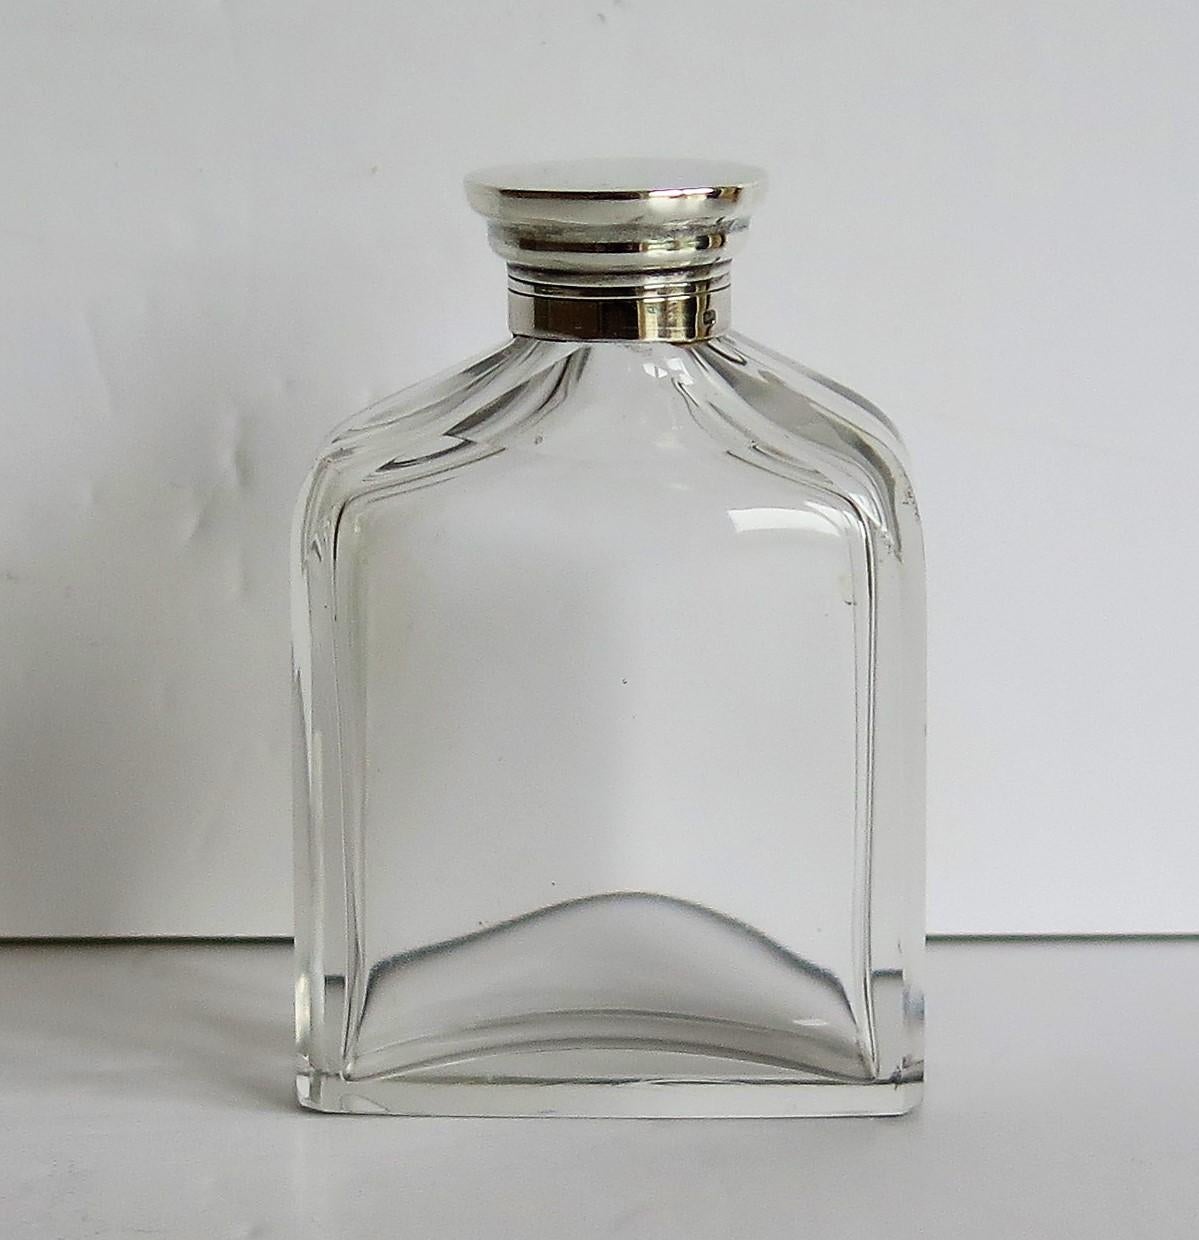 This is a good quality, very attractive crystal cut glass cologne or perfume bottle with a sterling silver screw top lid, possibly American, which we date to the early 20th century.

The clear glass bottle or jar has a rectilinear shape with a